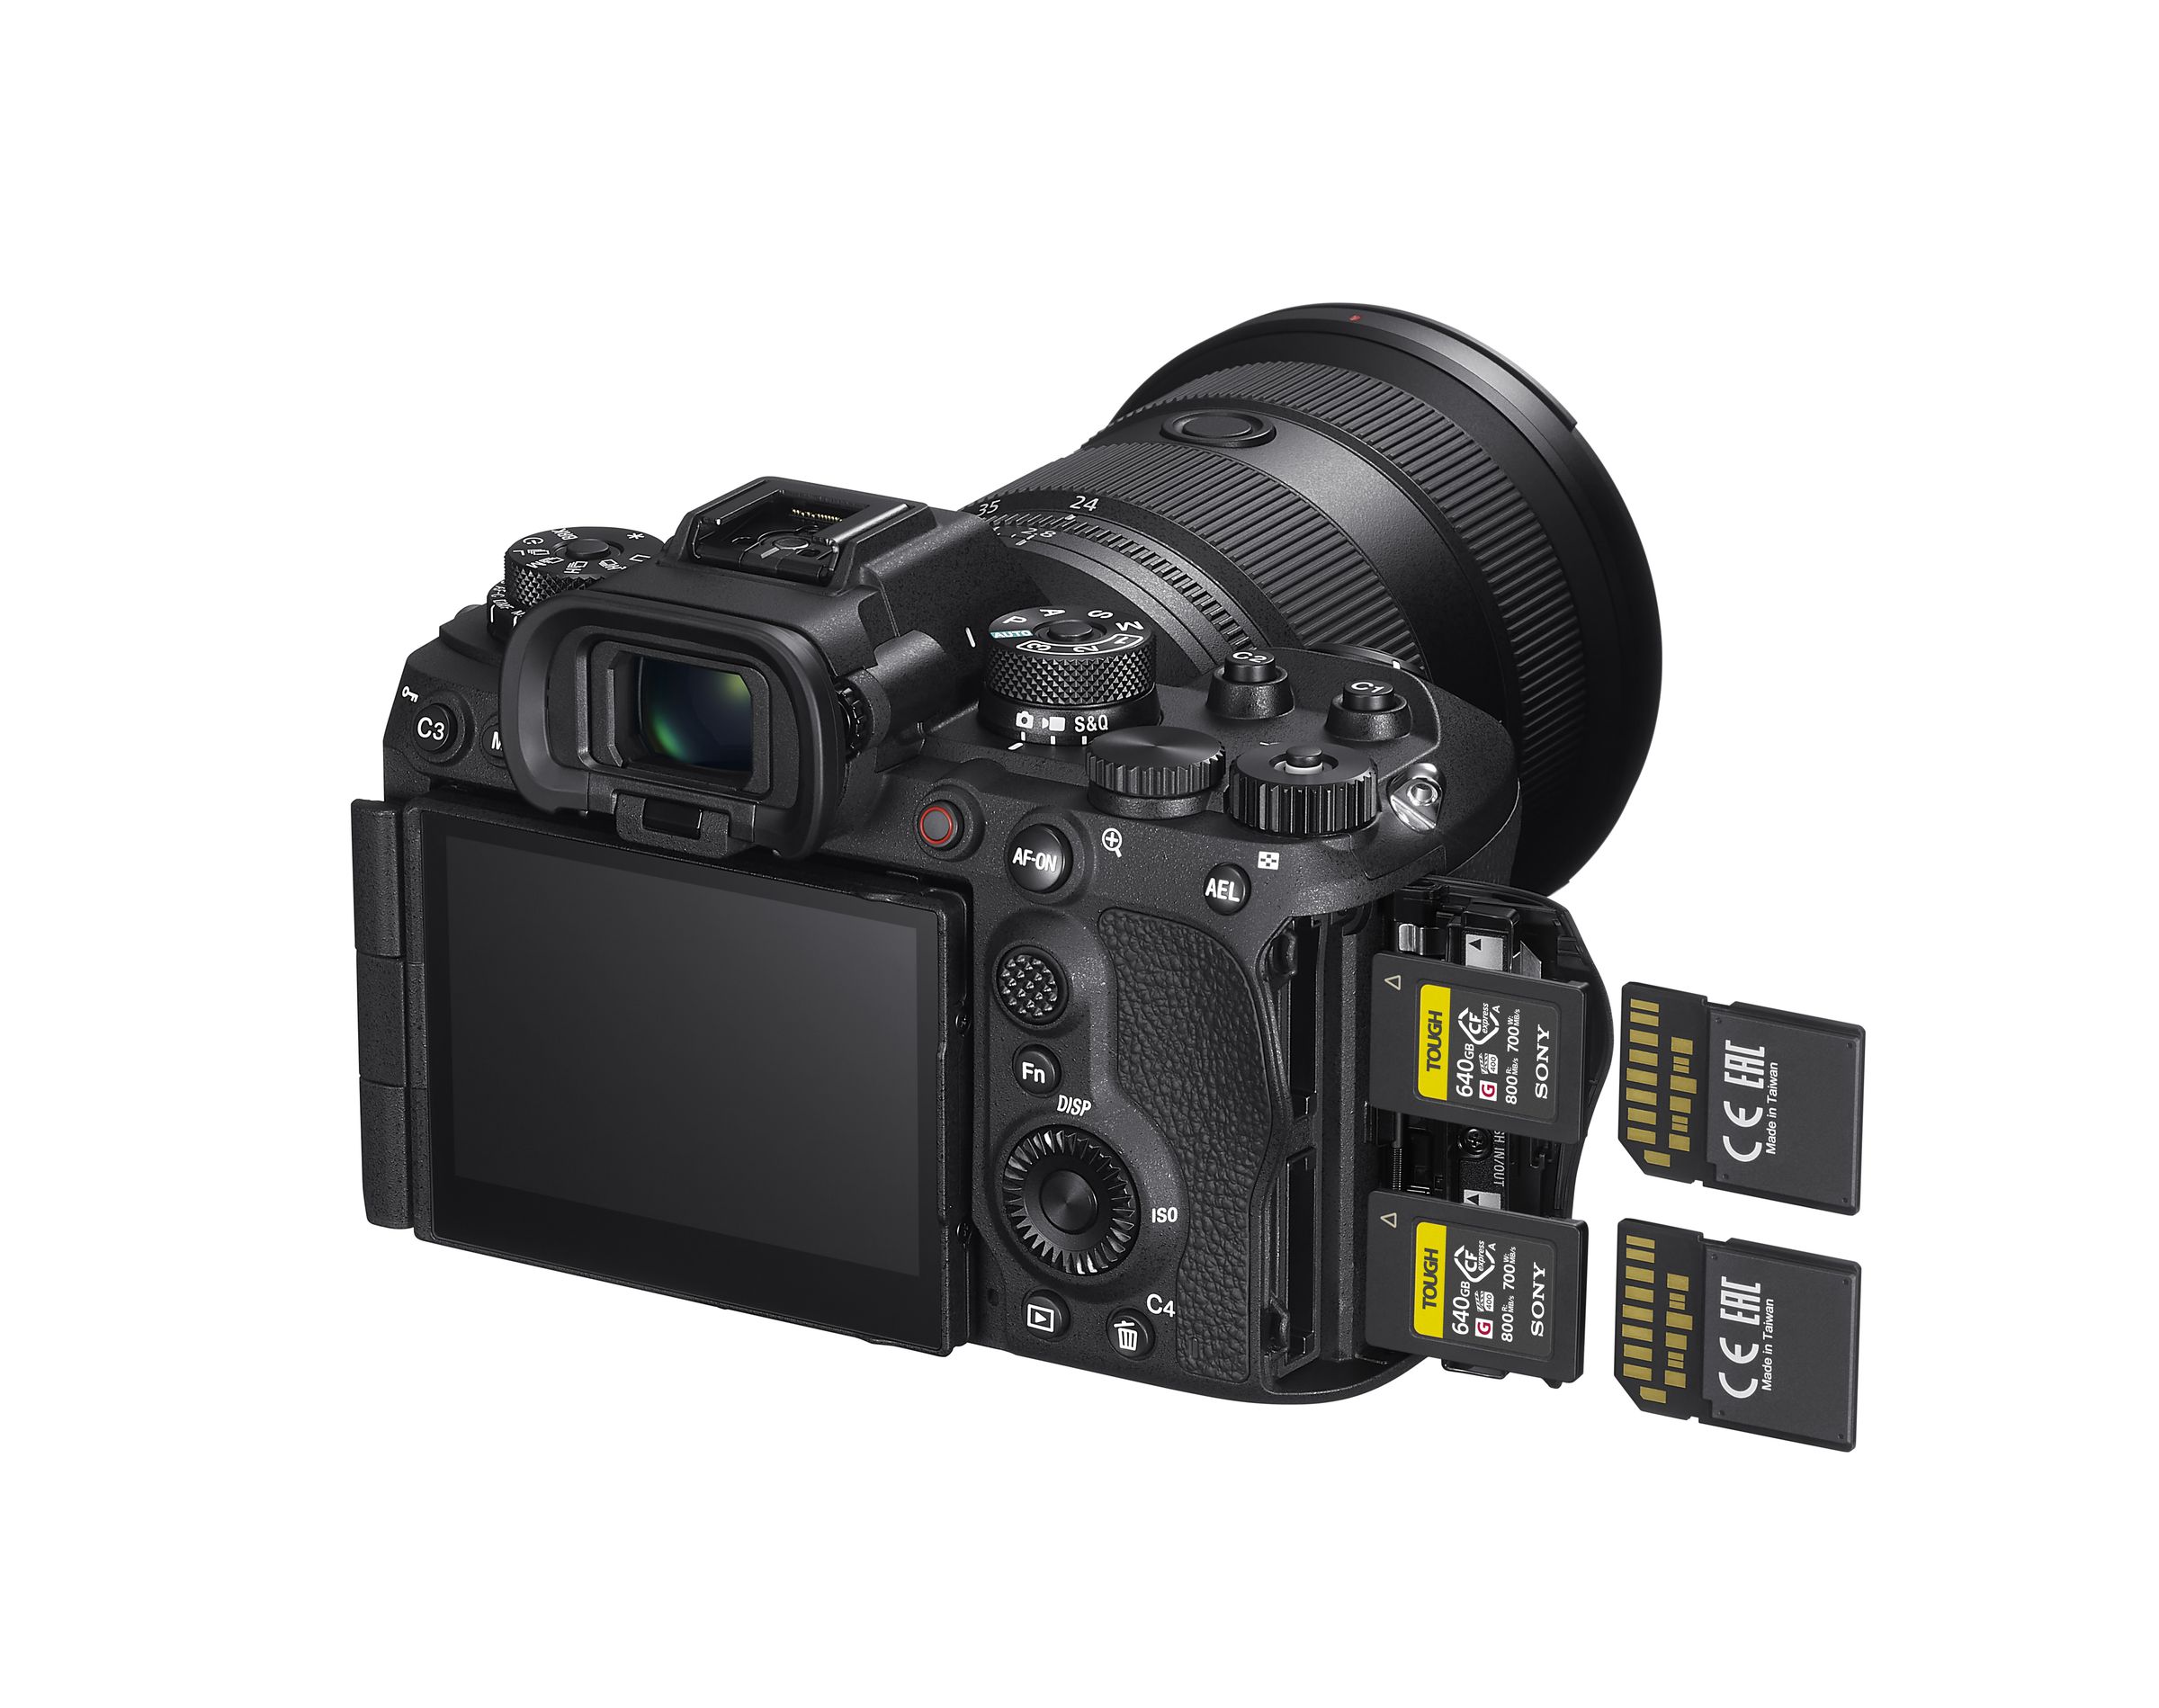 <em>The A9 III supports CFexpress Type A cards as well as UHS-I and UHS-II SD cards in the camera’s two card slots.</em>